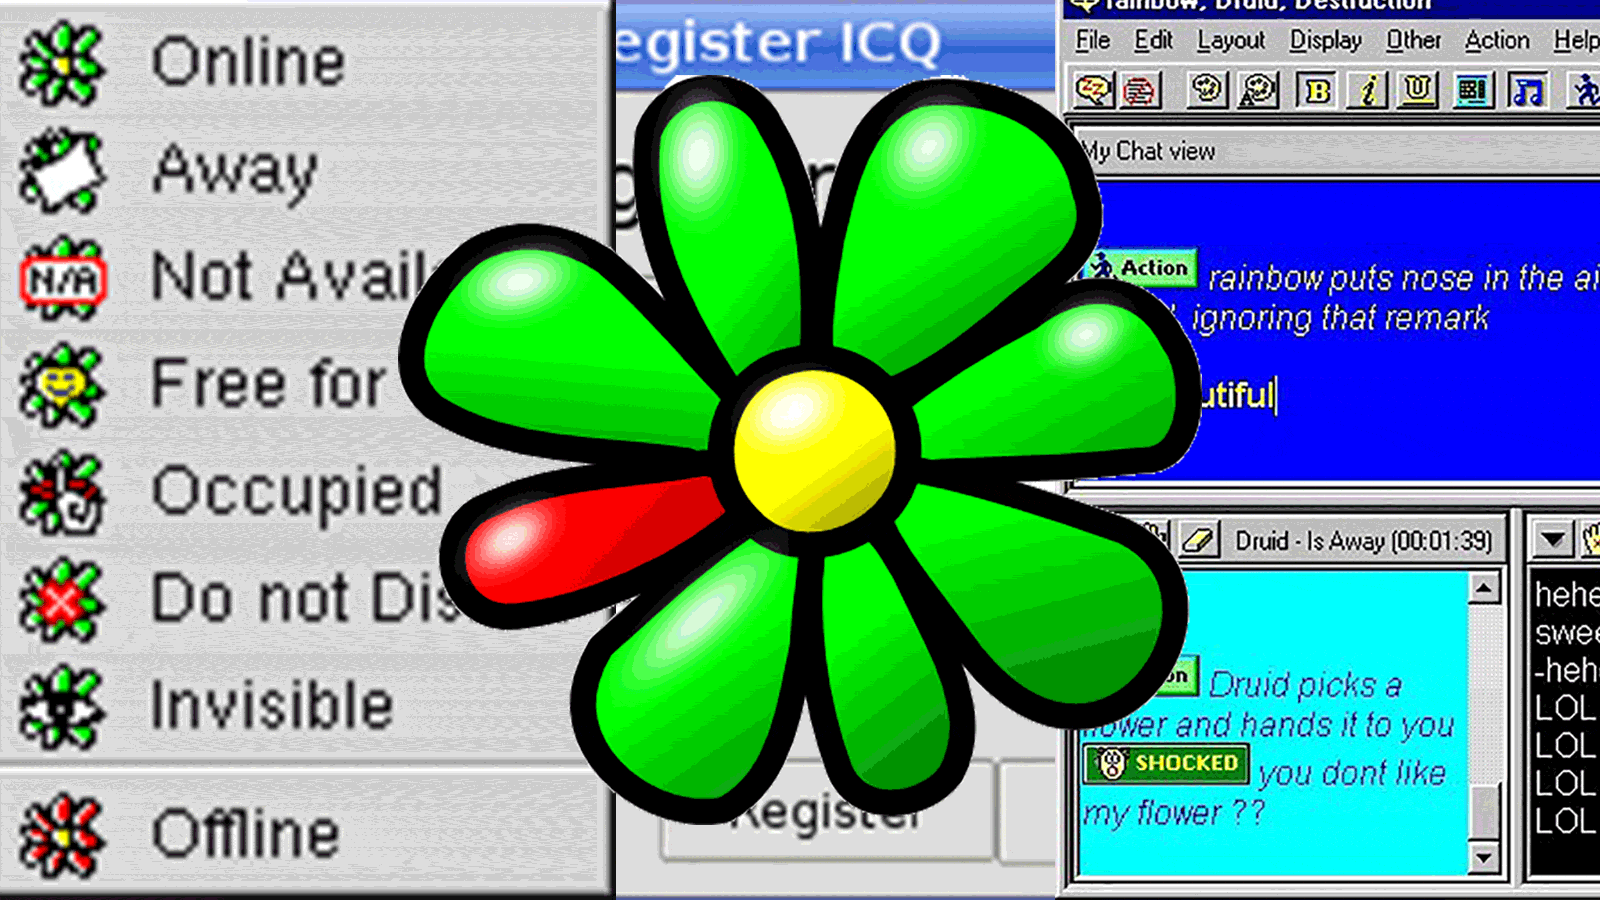 Icq chat africa